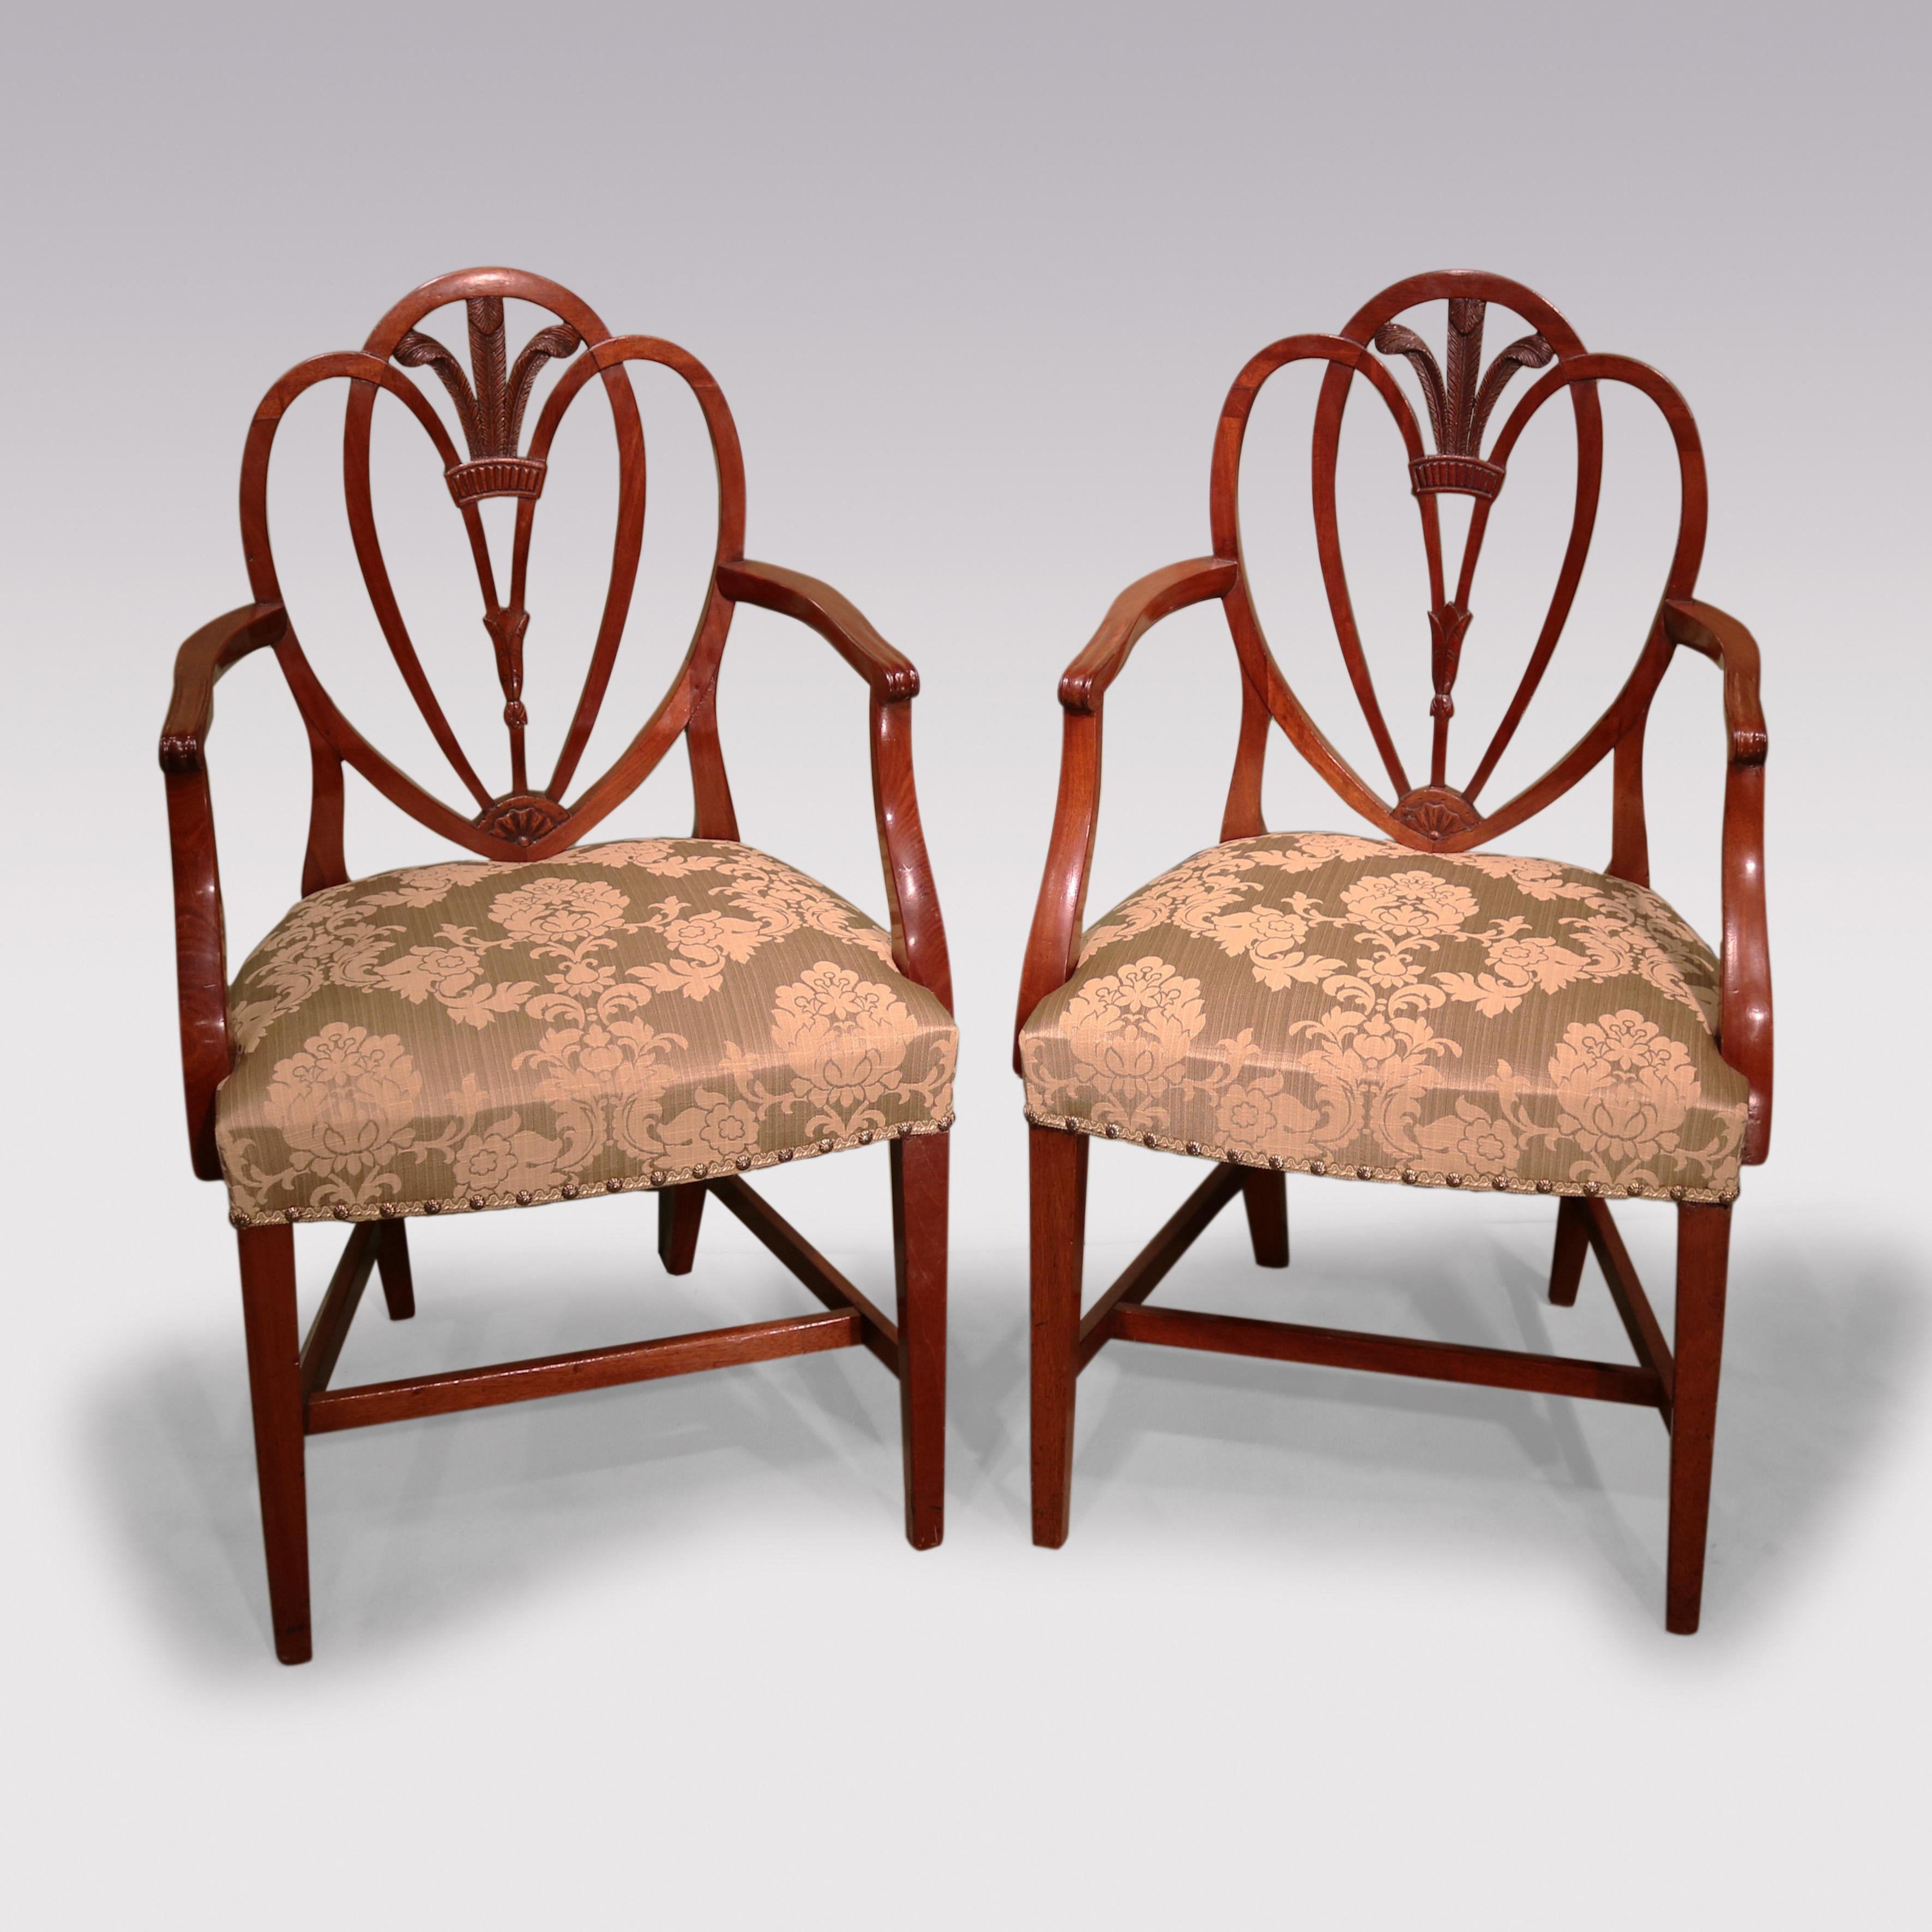 A set of 6 single and 2 arm Hepplewhite period mahogany Dining Chairs, having triple arched backs enclosing carved Prince of Wales feathers, with set-back arms above stuffed-over seats supported on square tapering legs with “H” stretchers.